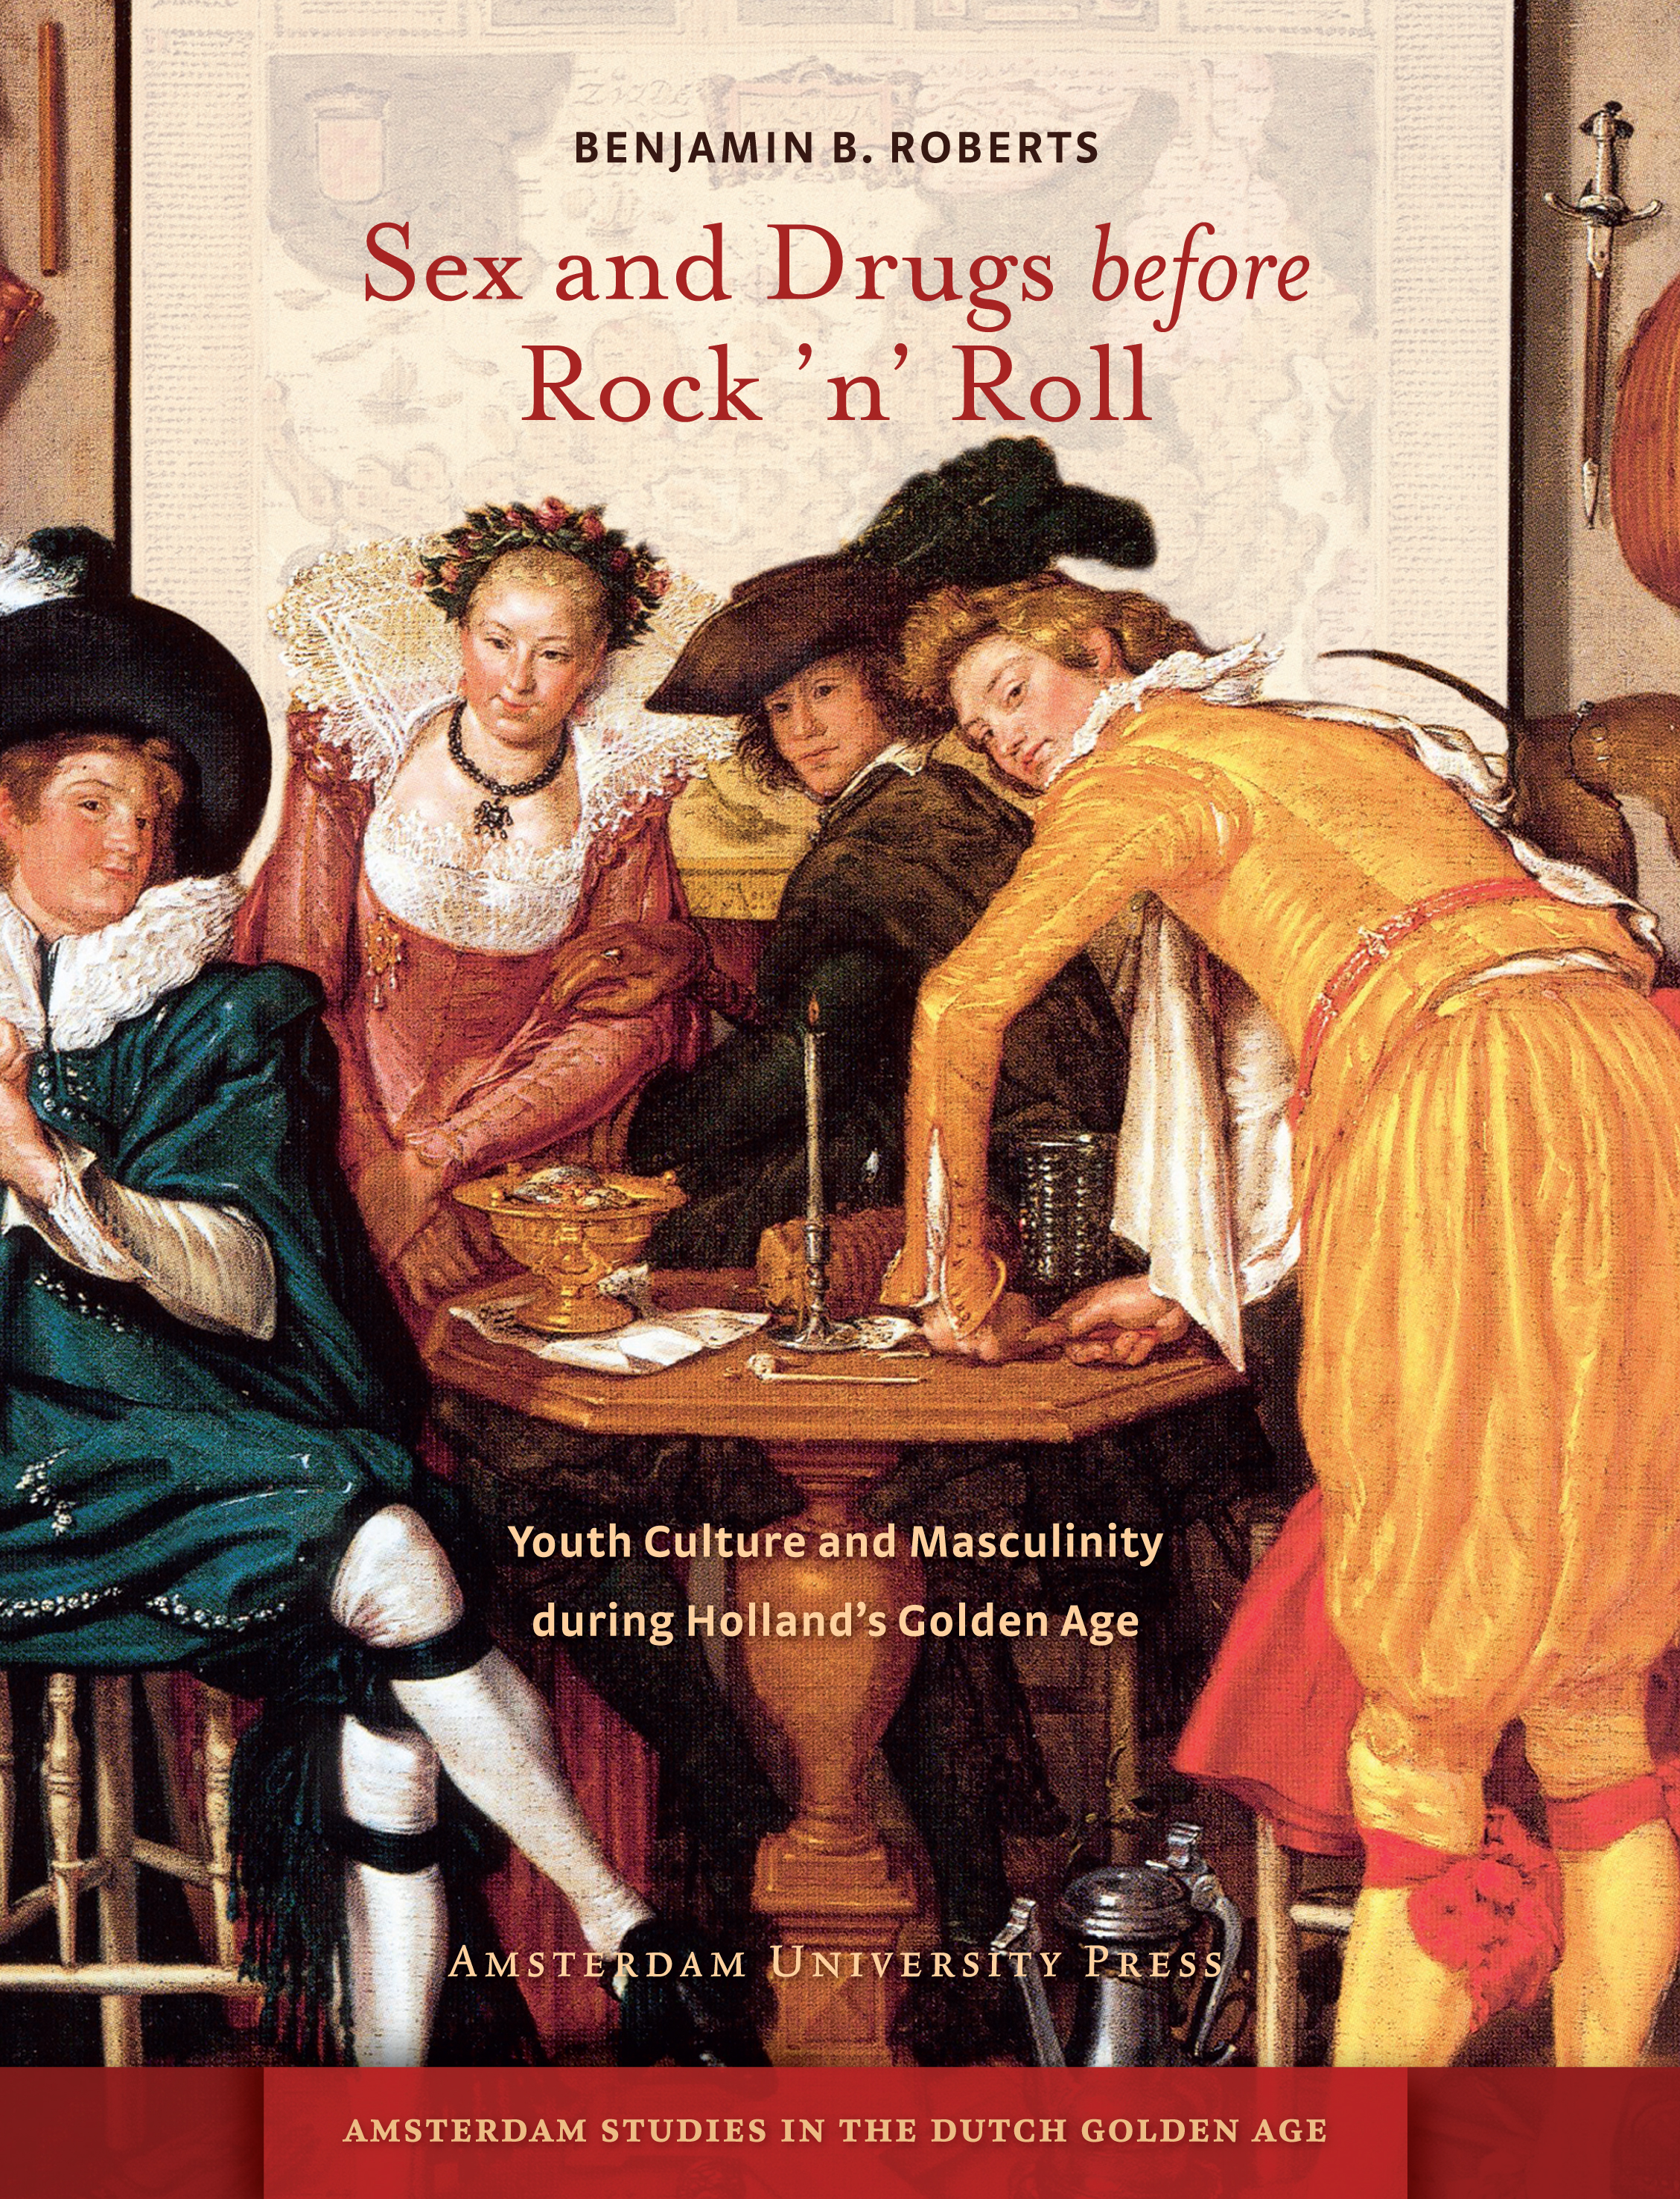 Sex and Drugs before Rock 'n' Roll | Amsterdam University Press